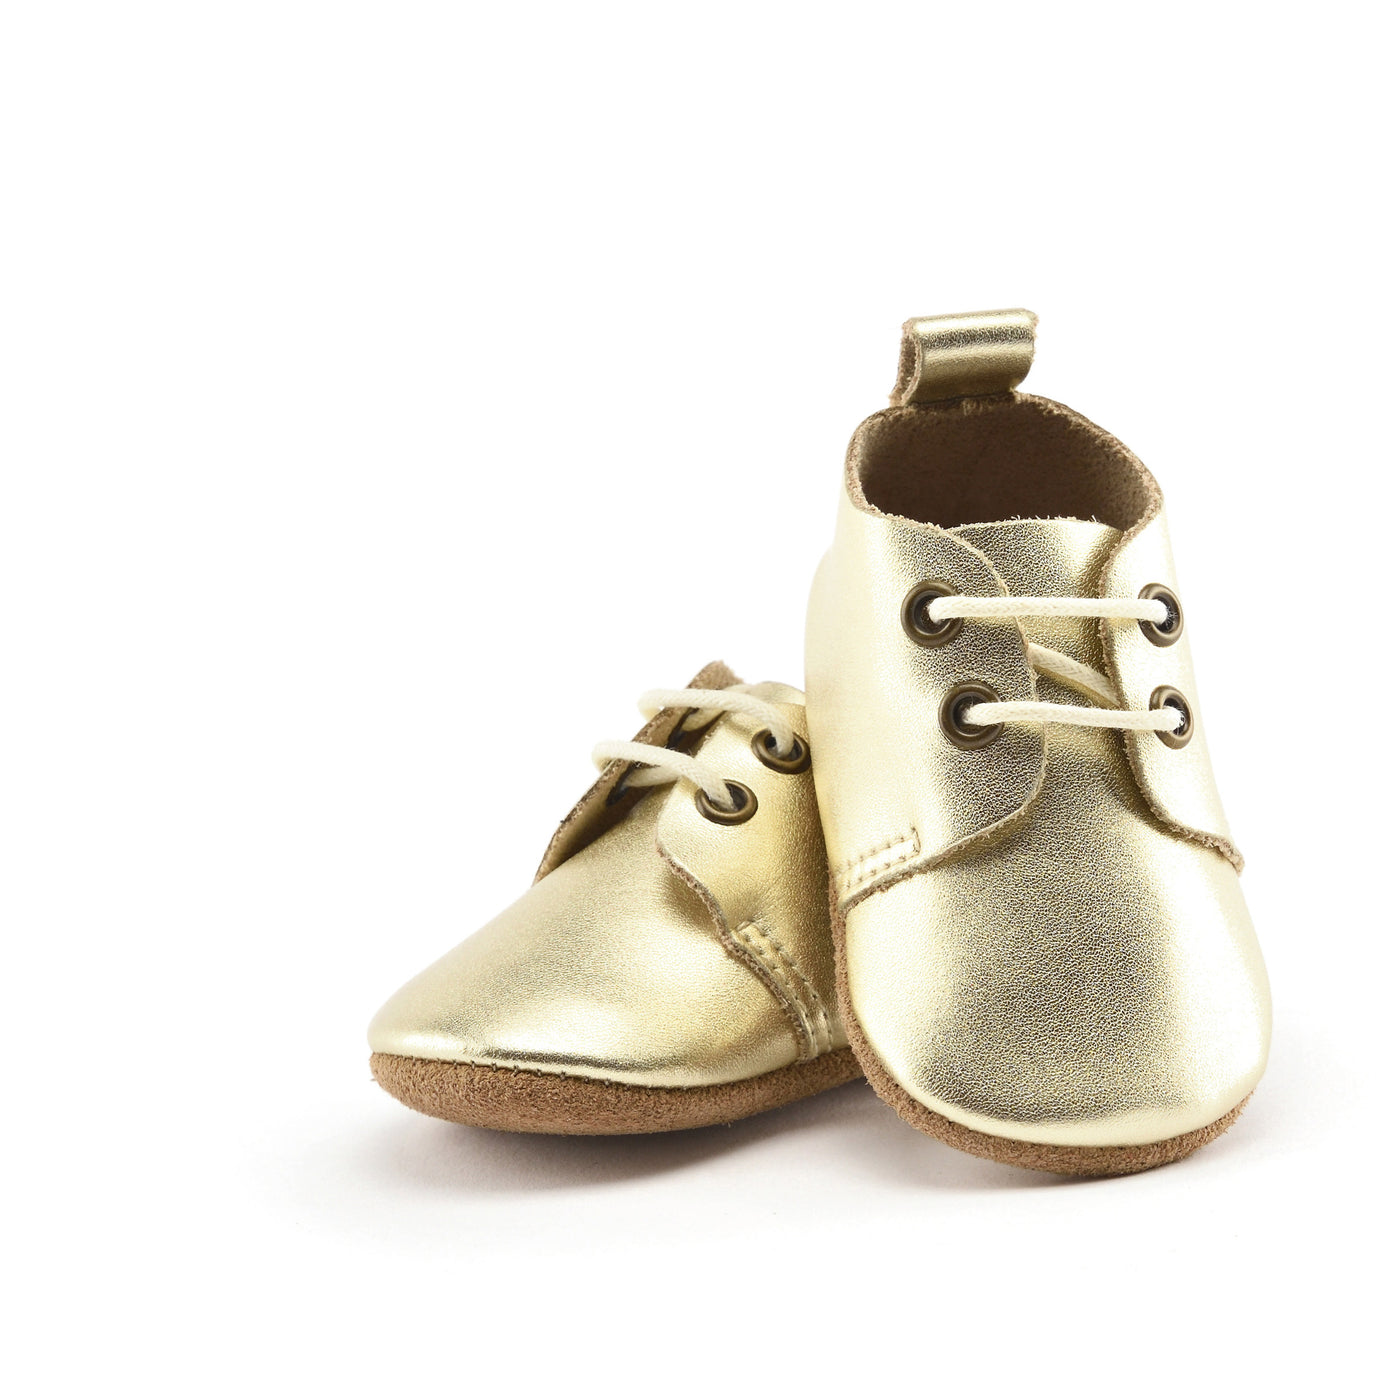 Goldie - Low Top Oxfords - Soft Sole